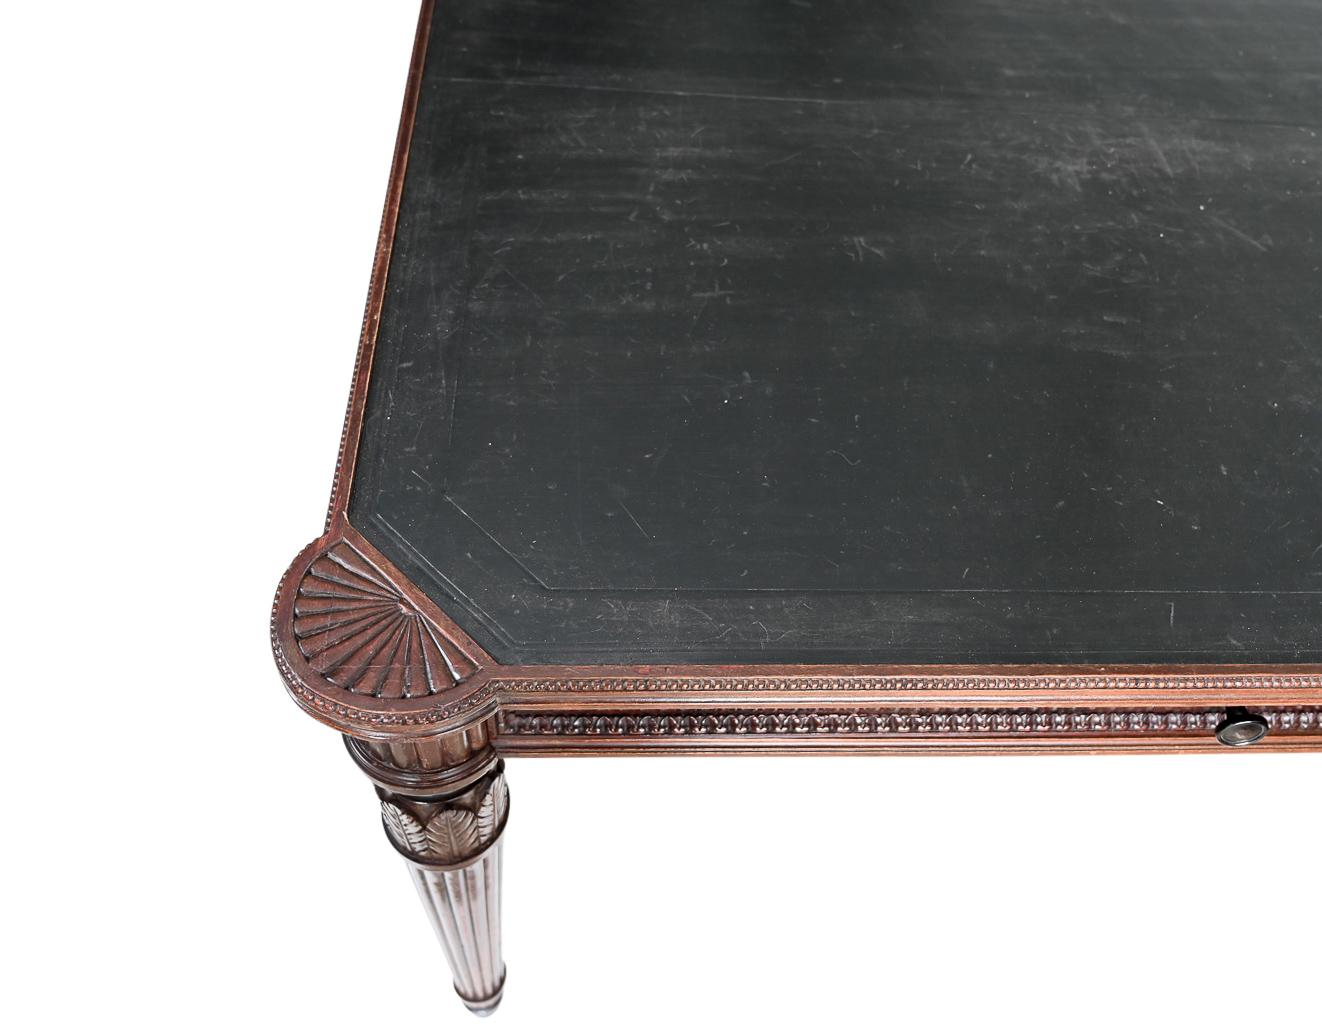 Neoclassical Revival Large Italian Library Table in the 18th Century Style Ex Collection Pierre Bergé